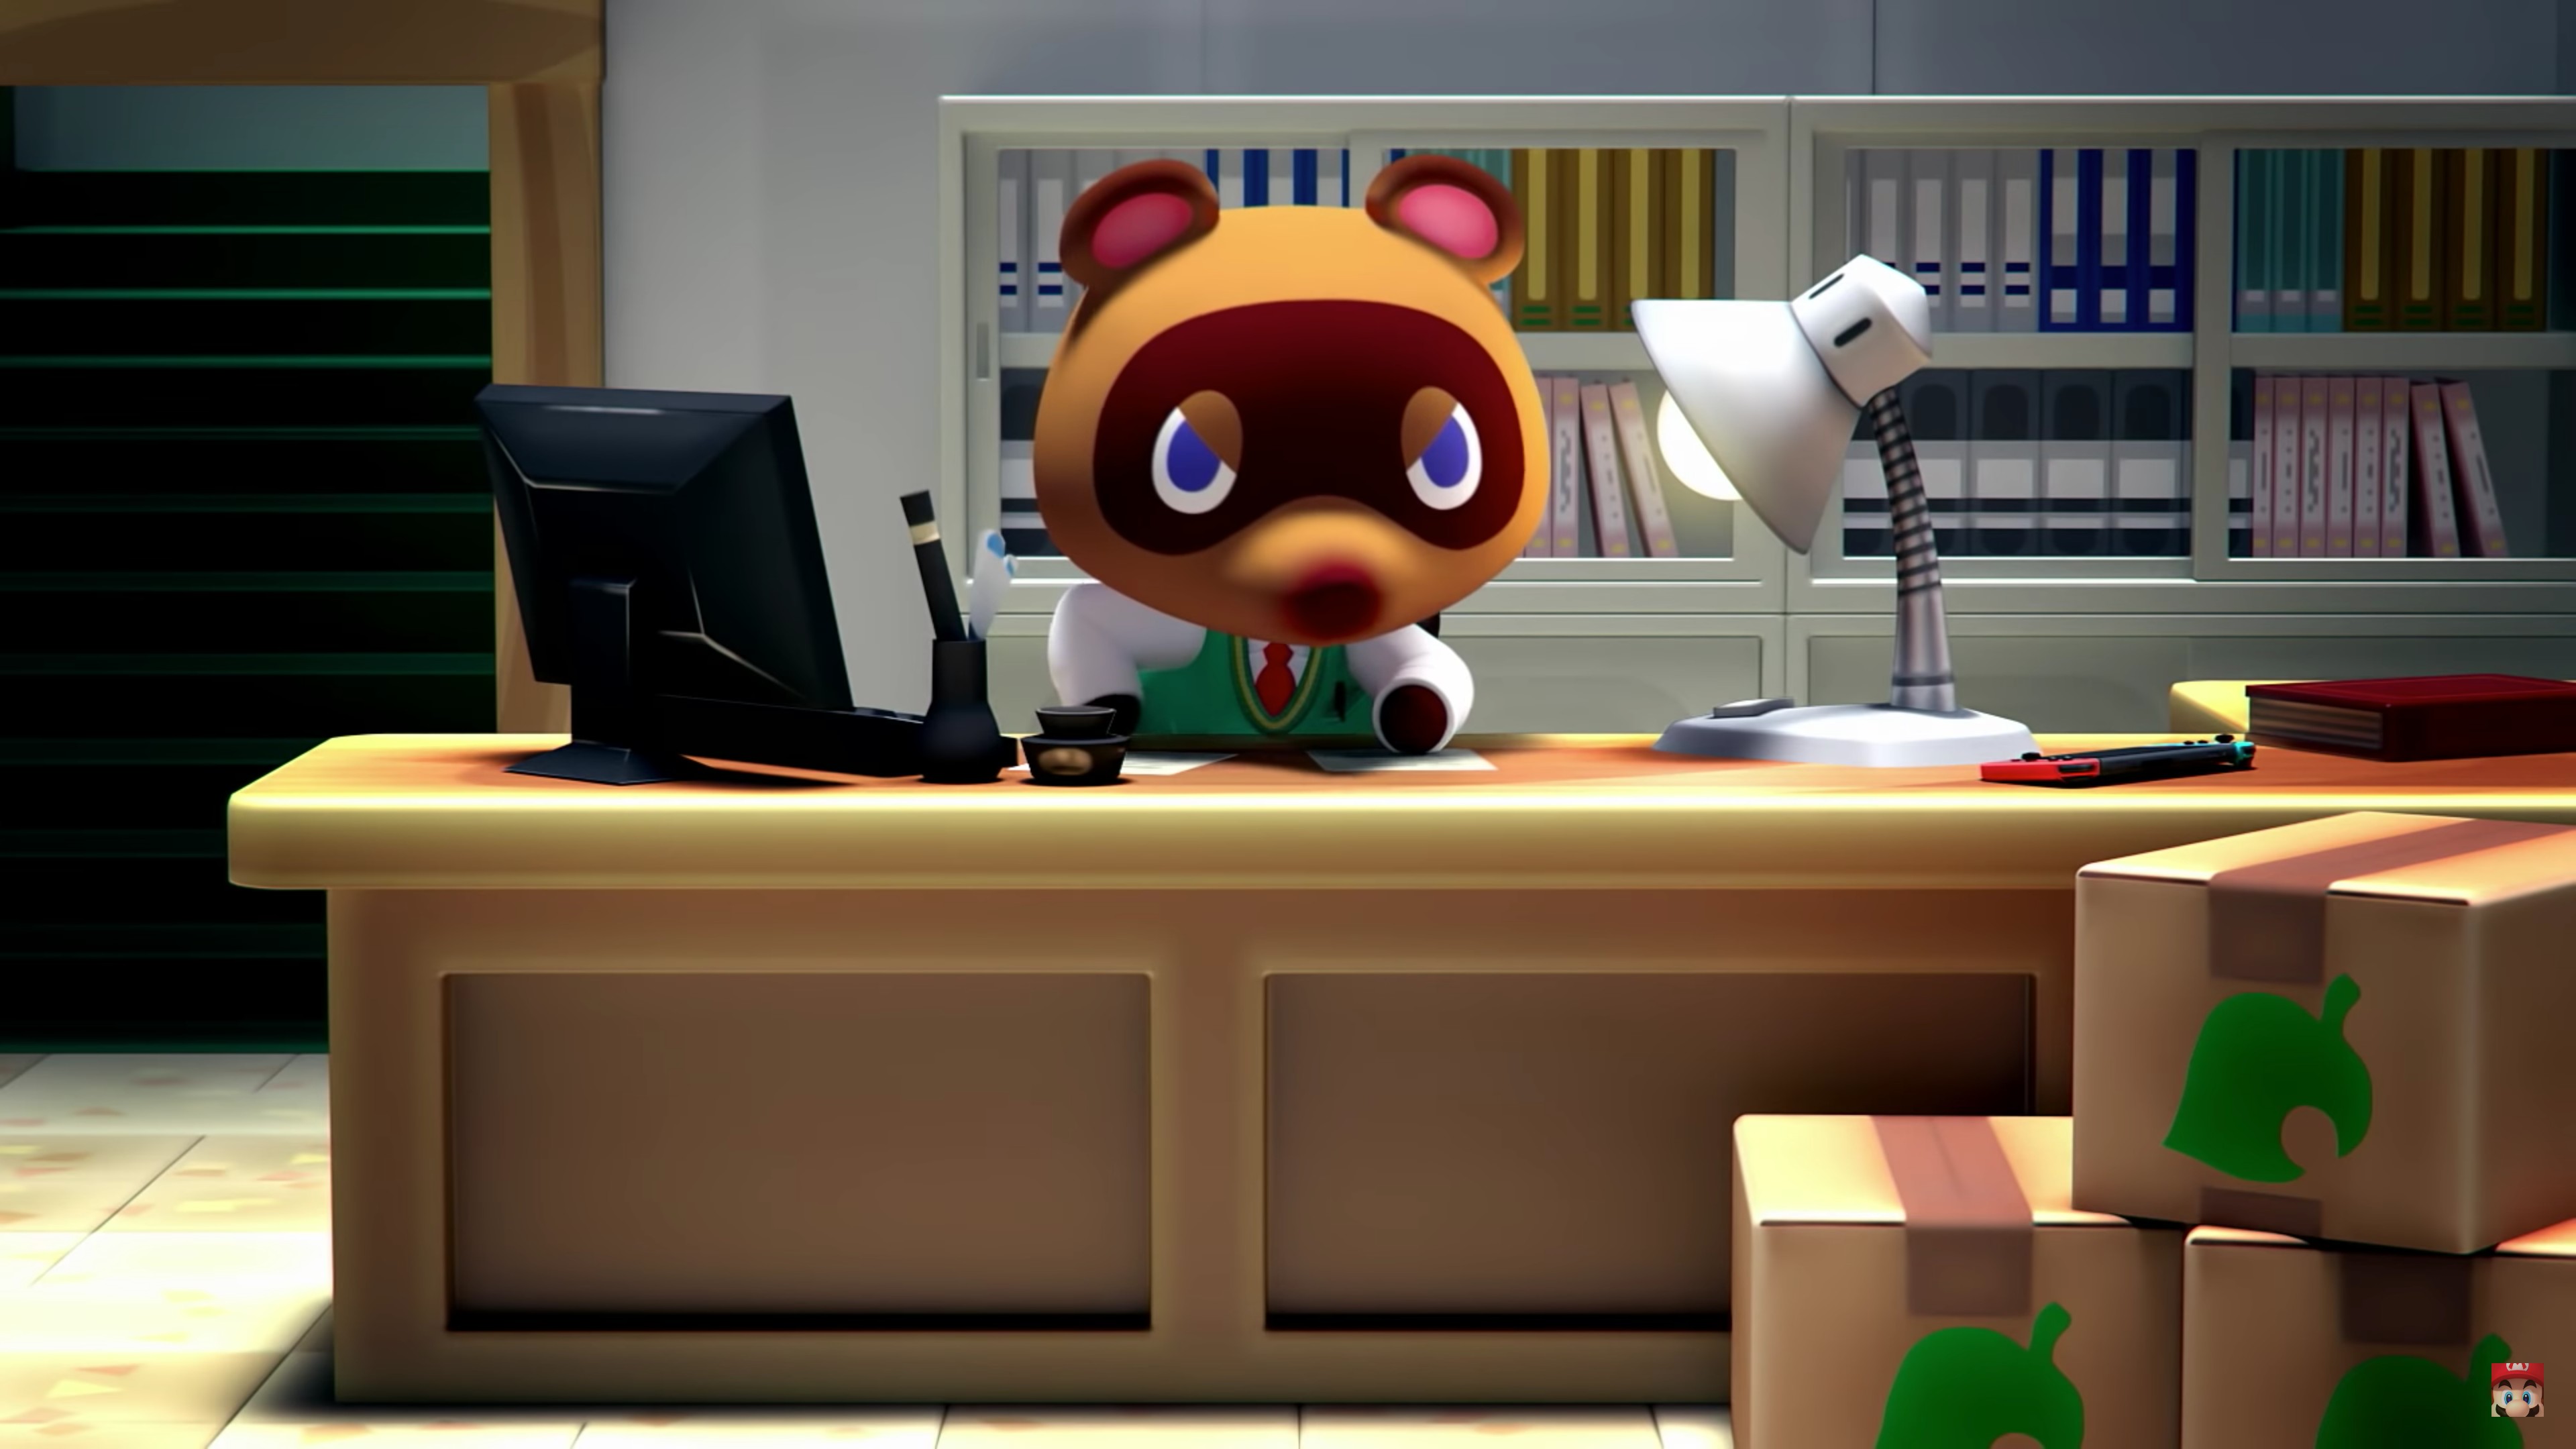 Animal Crossing Porn Combines Villagers and the Horniness of Isolation